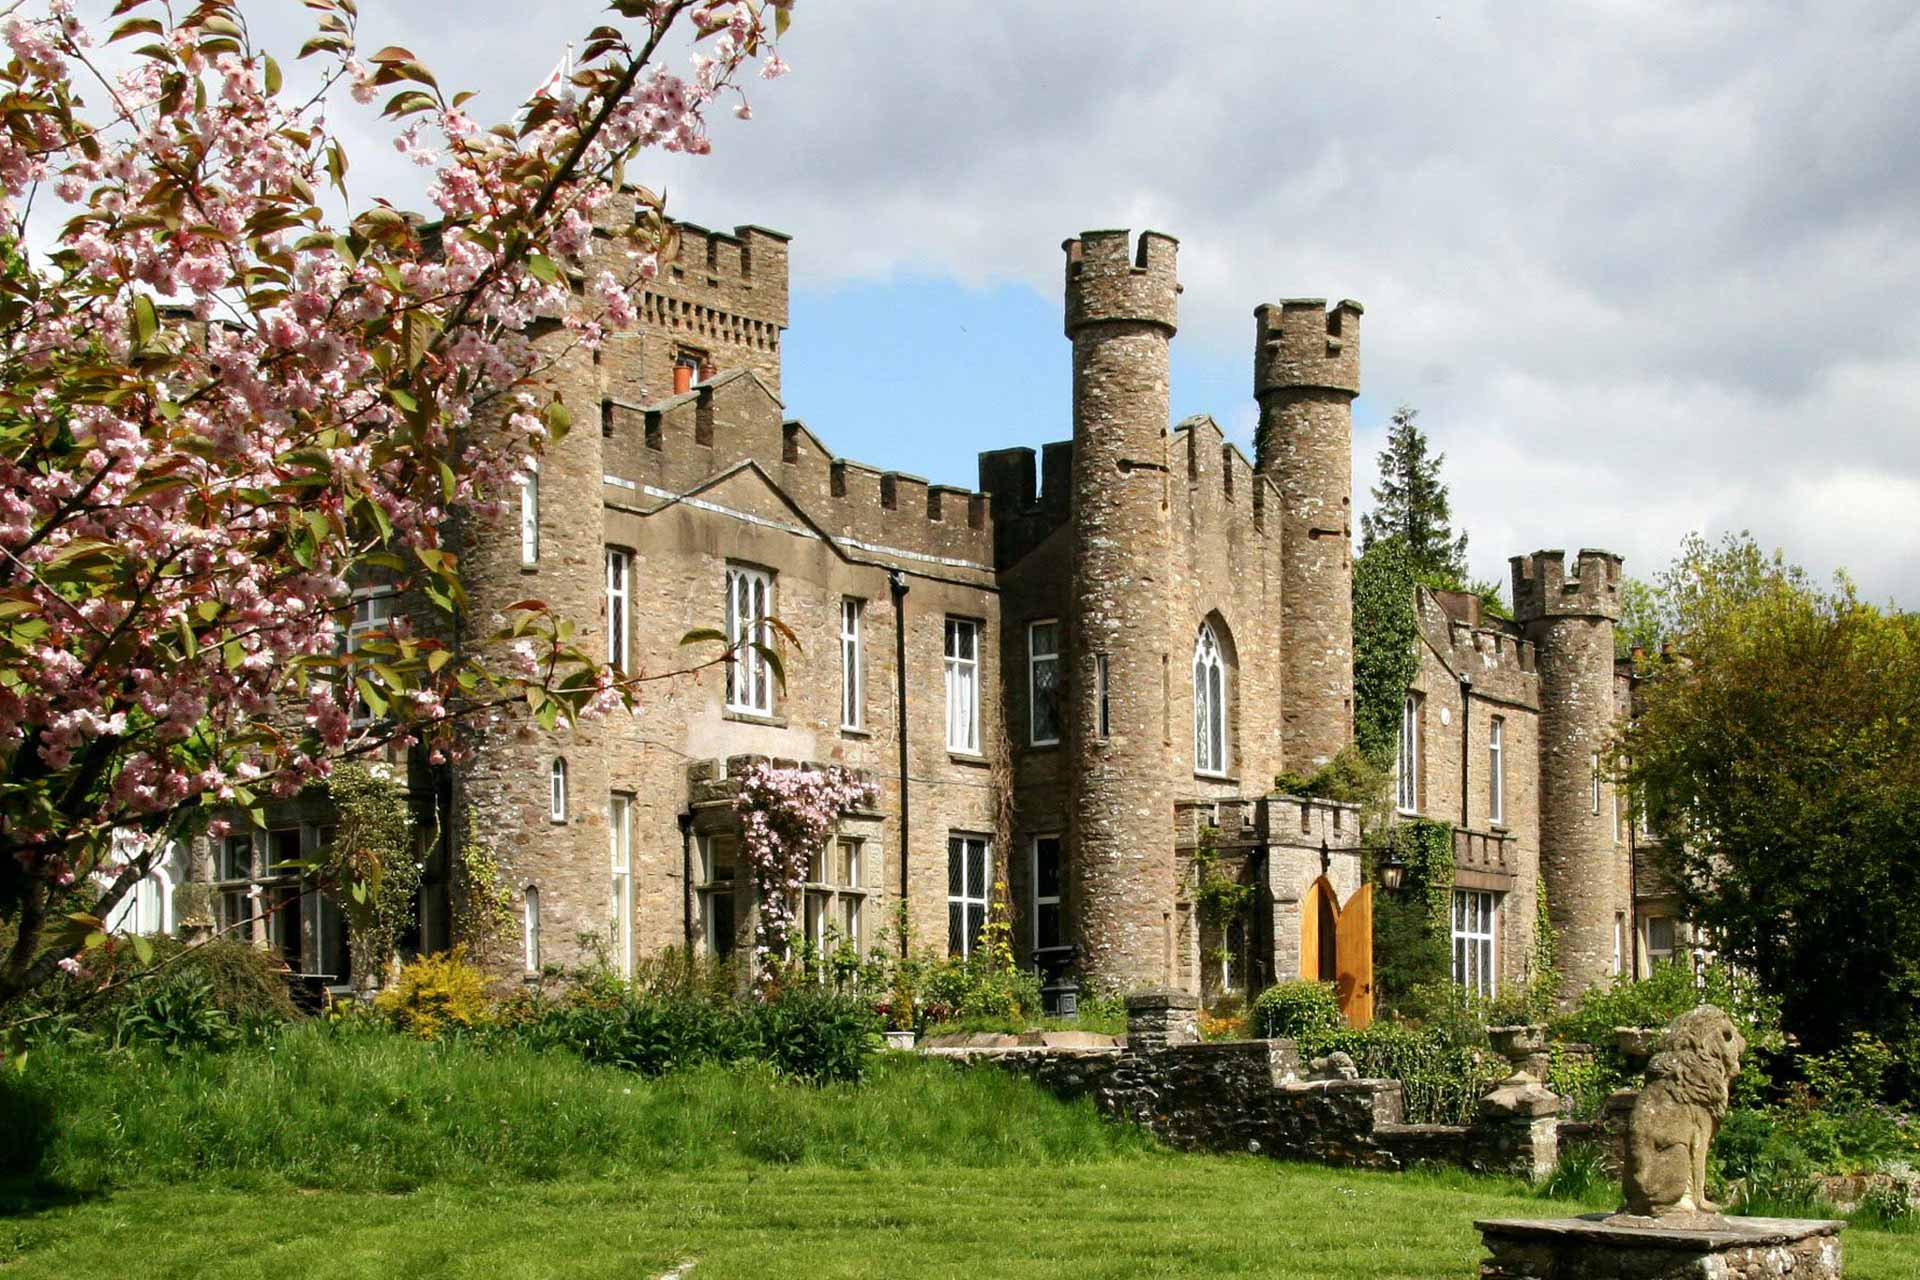 Augill Castle, Bed & Breakfast or Self-Catering Accommodation ...